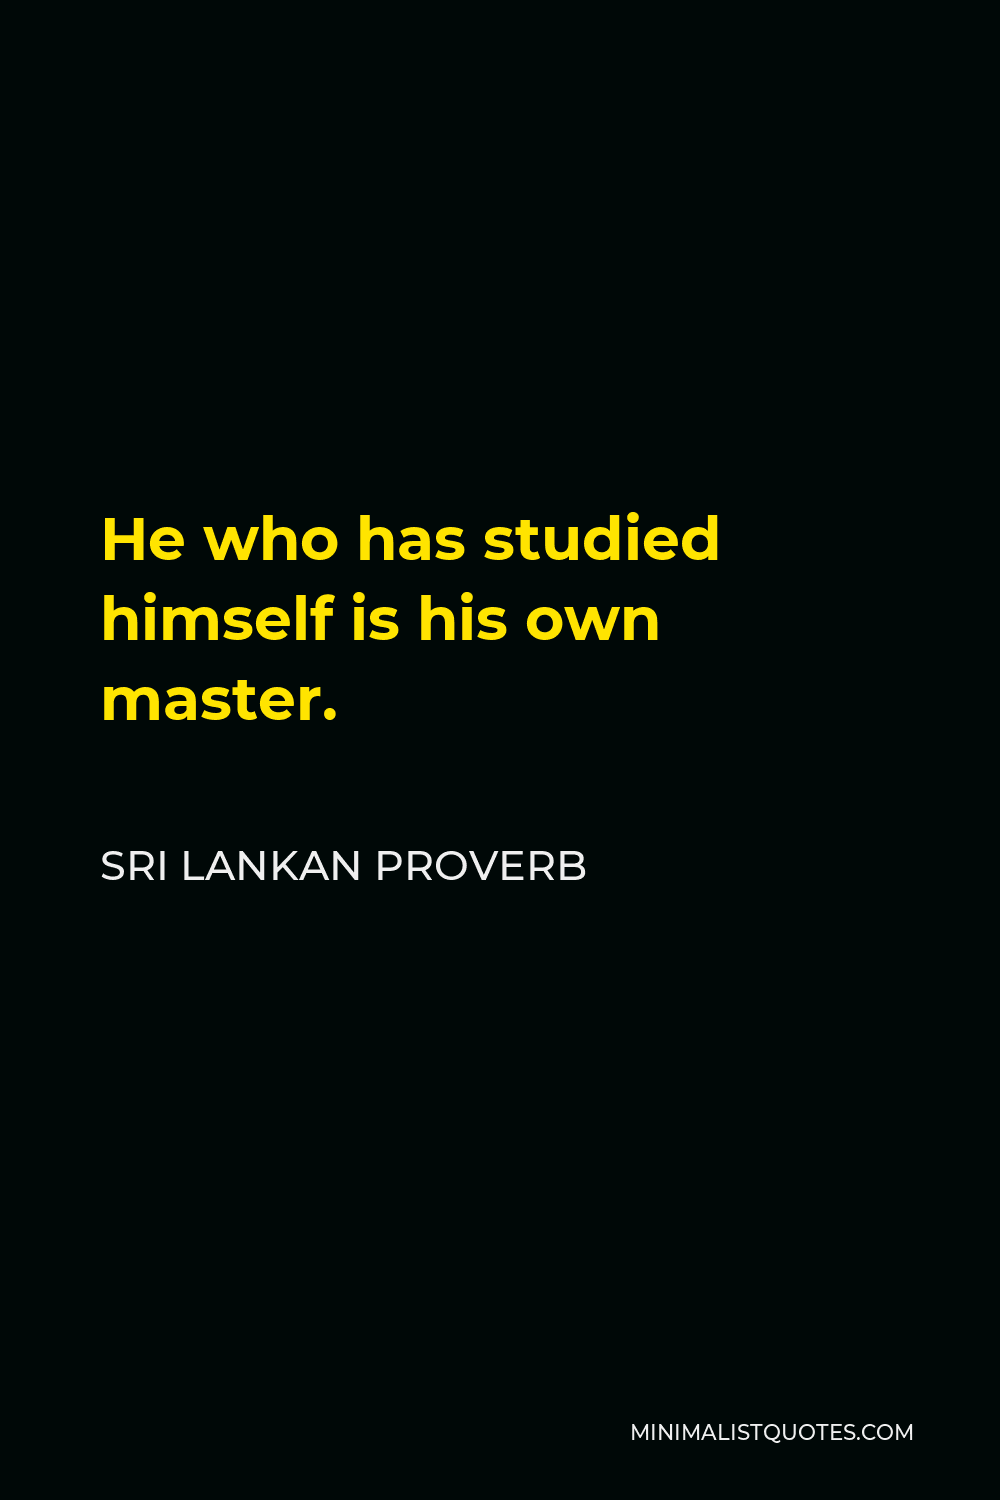 Sri Lankan Proverb Quote - He who has studied himself is his own master.